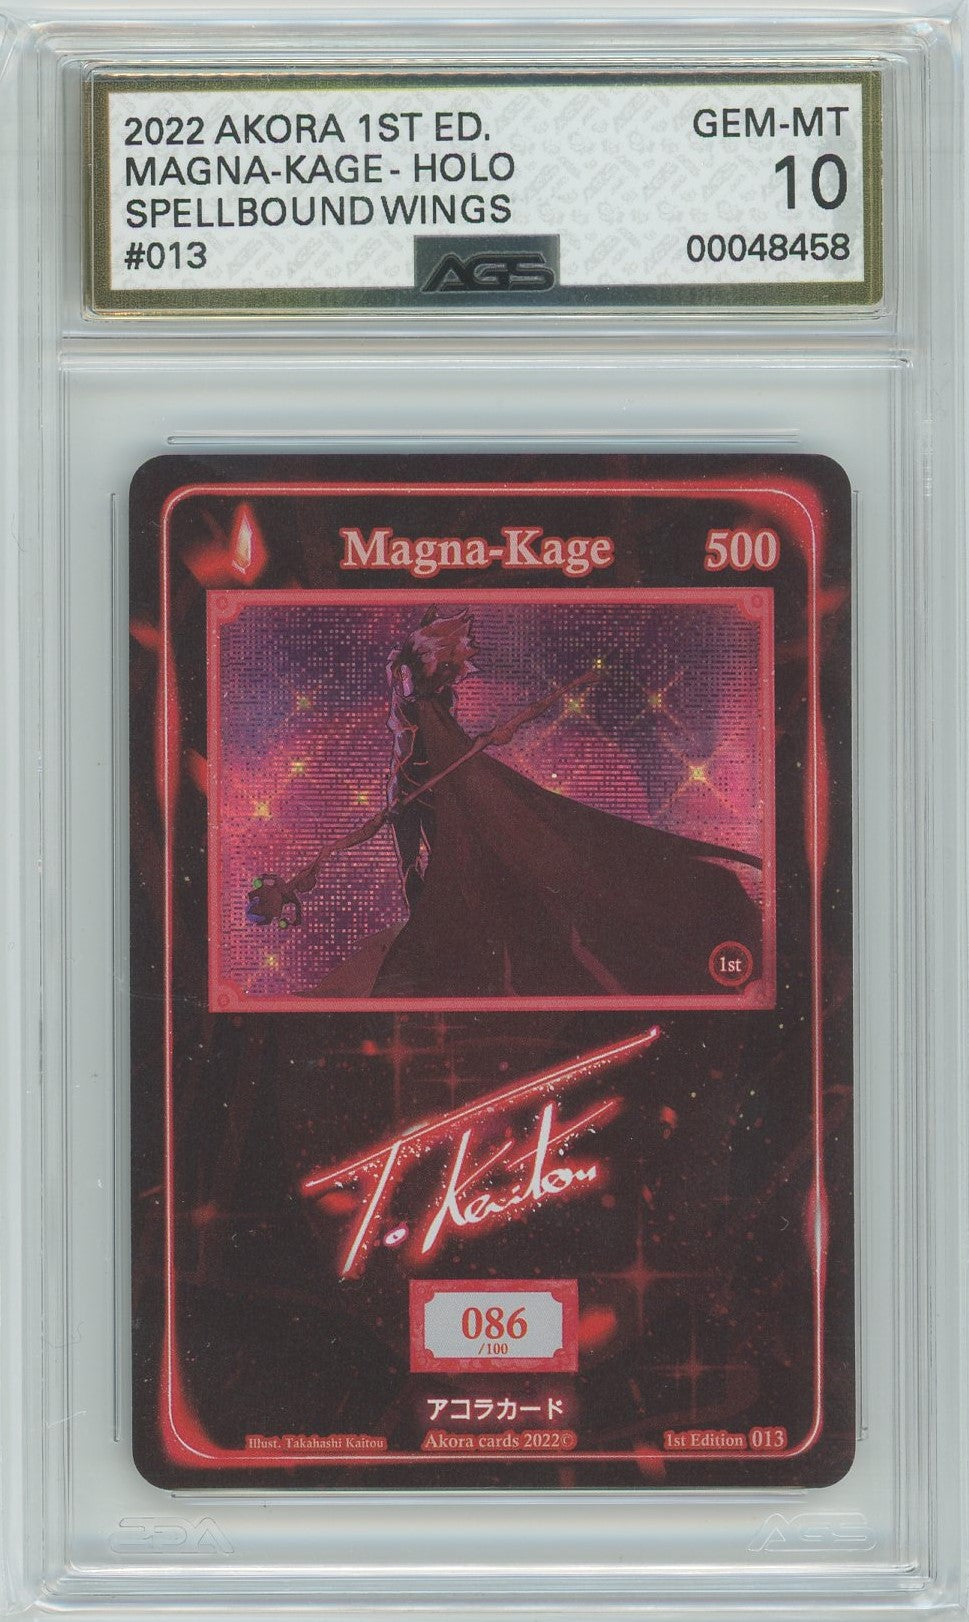 AGS (GEM-MT 10) Magna-Kage #013 - Spellbound Wings (1st Edition)  (SERIALIZED 086/100) (#00048458)